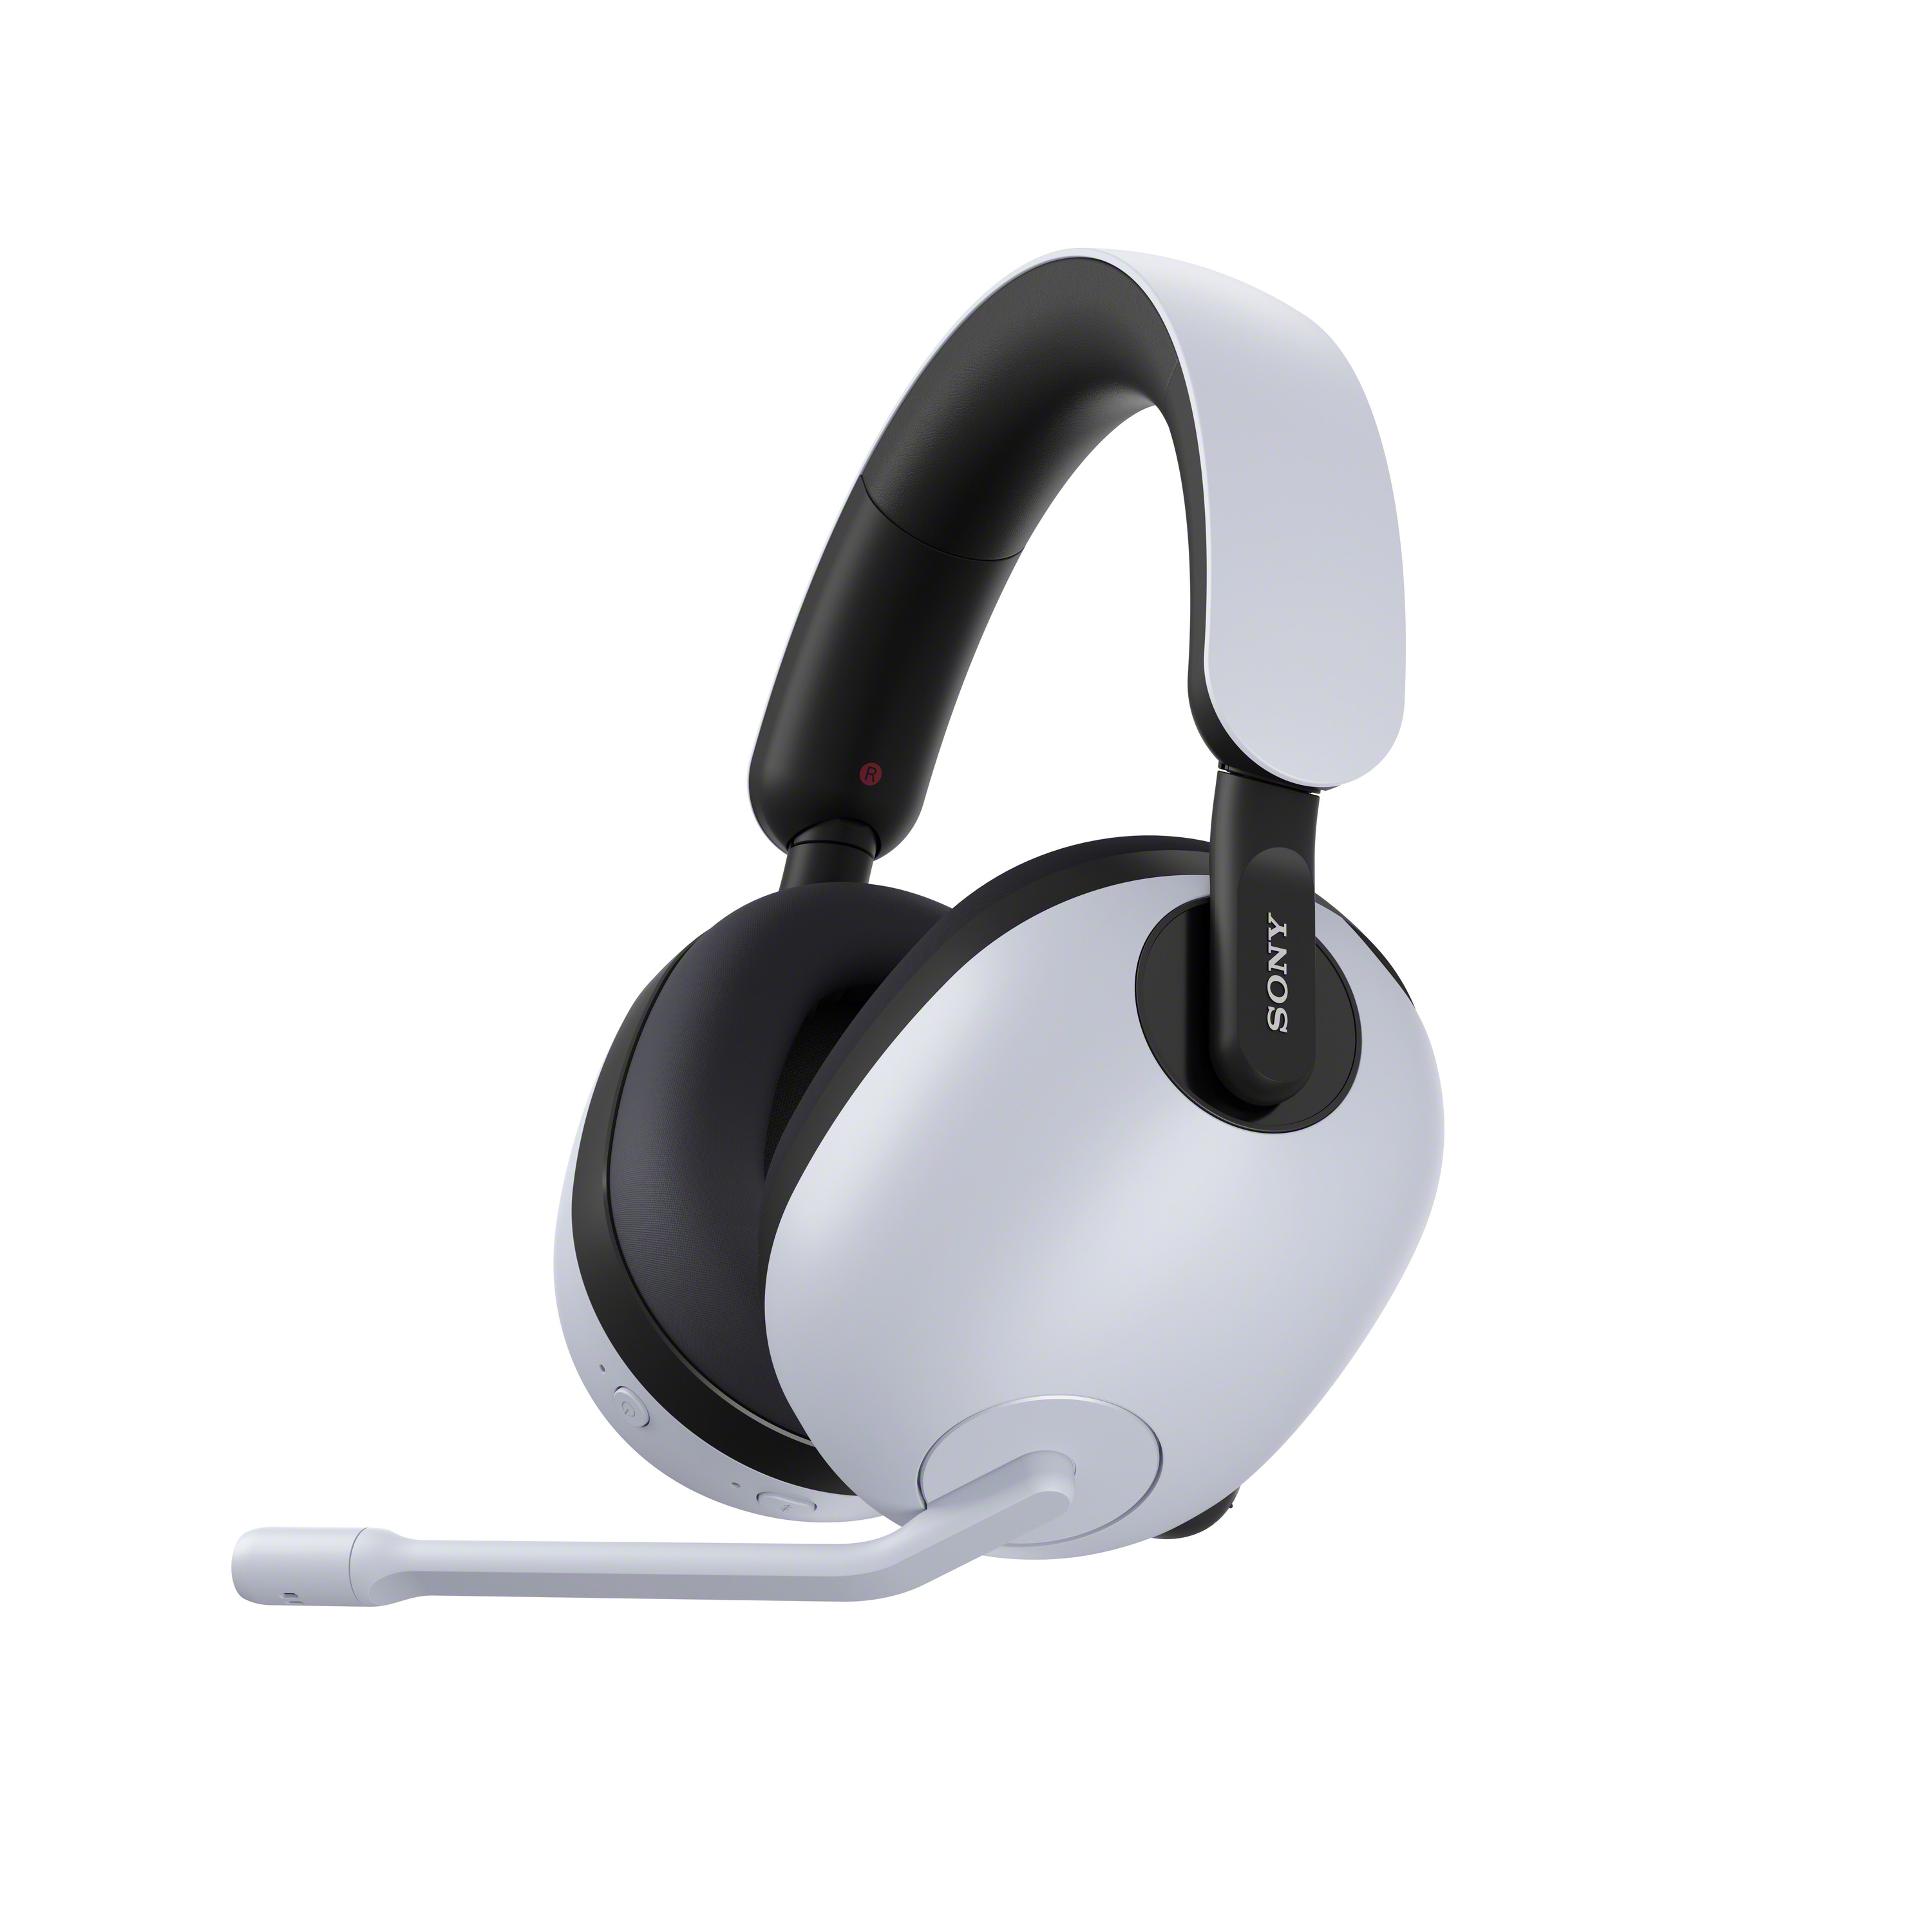 Sony INZONE H7 Wireless Gaming Headset, Over-Ear Headphones with 360 Spatial Sound, WH-G700 - image 1 of 14